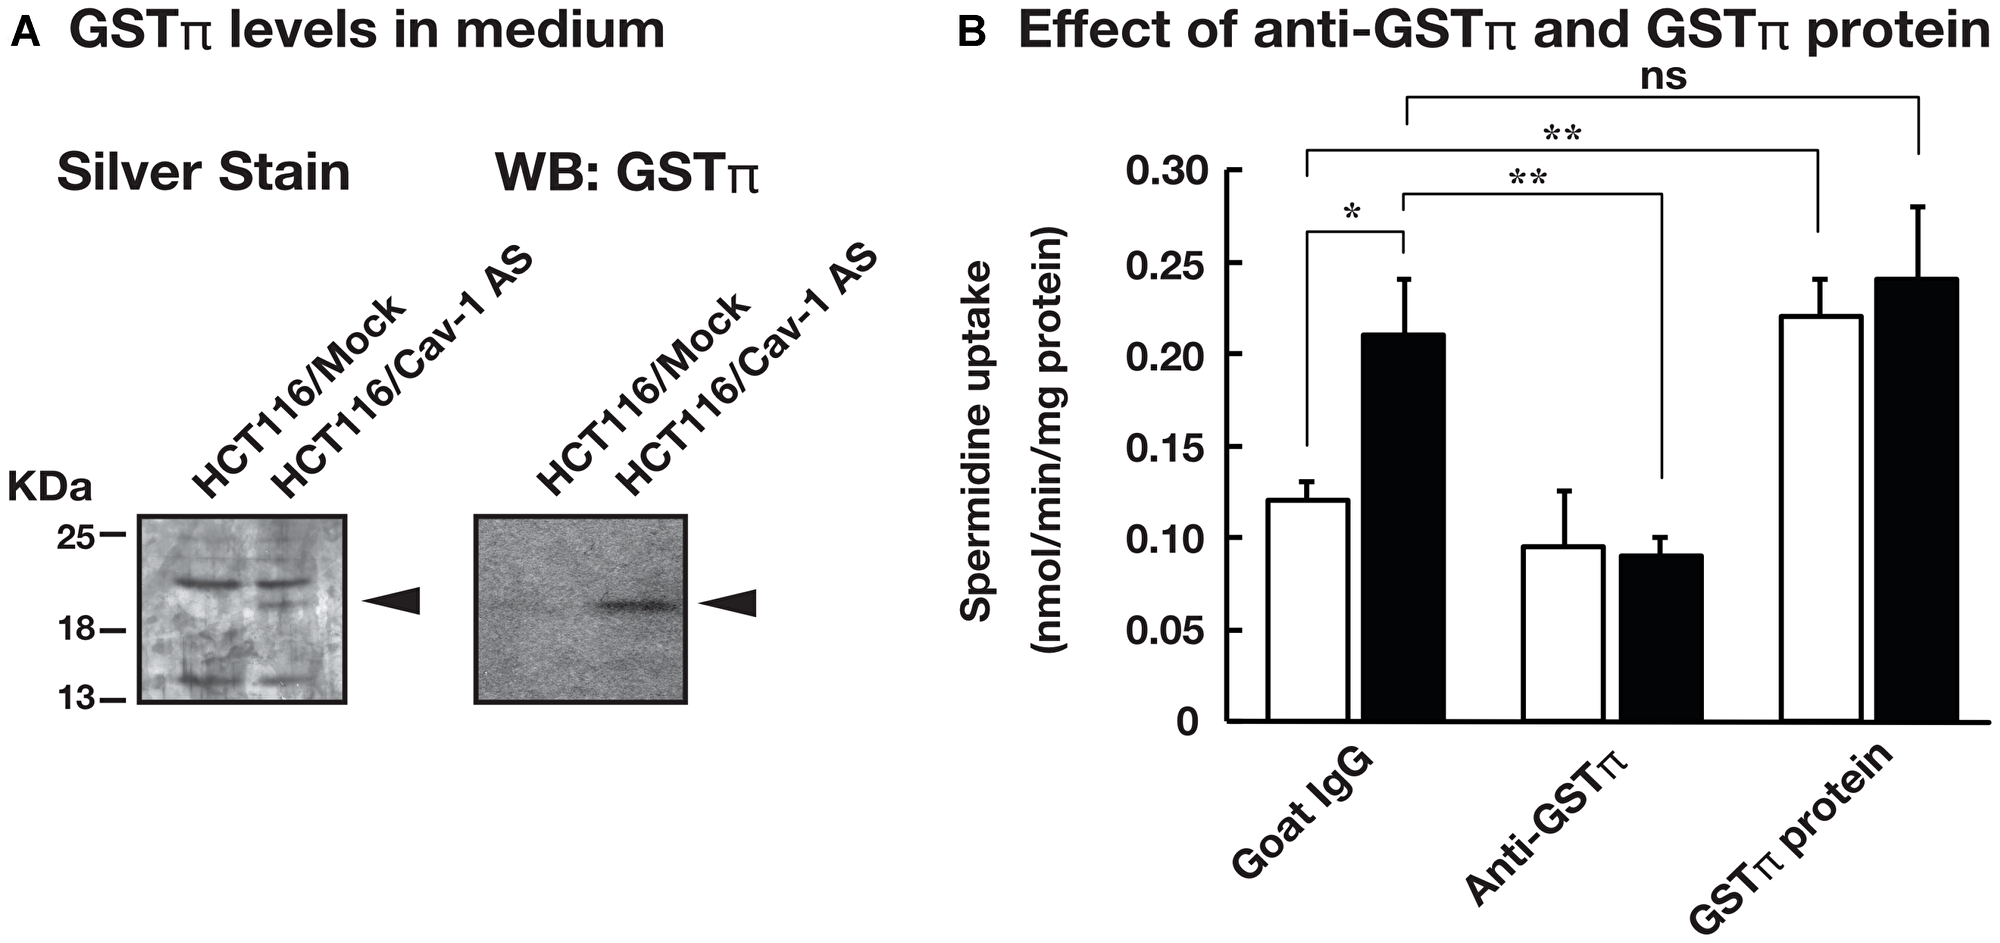 GSTπ was highly expressed in the culture medium of HCT116/Cav-1 AS cells and stimulated spermidine uptake.